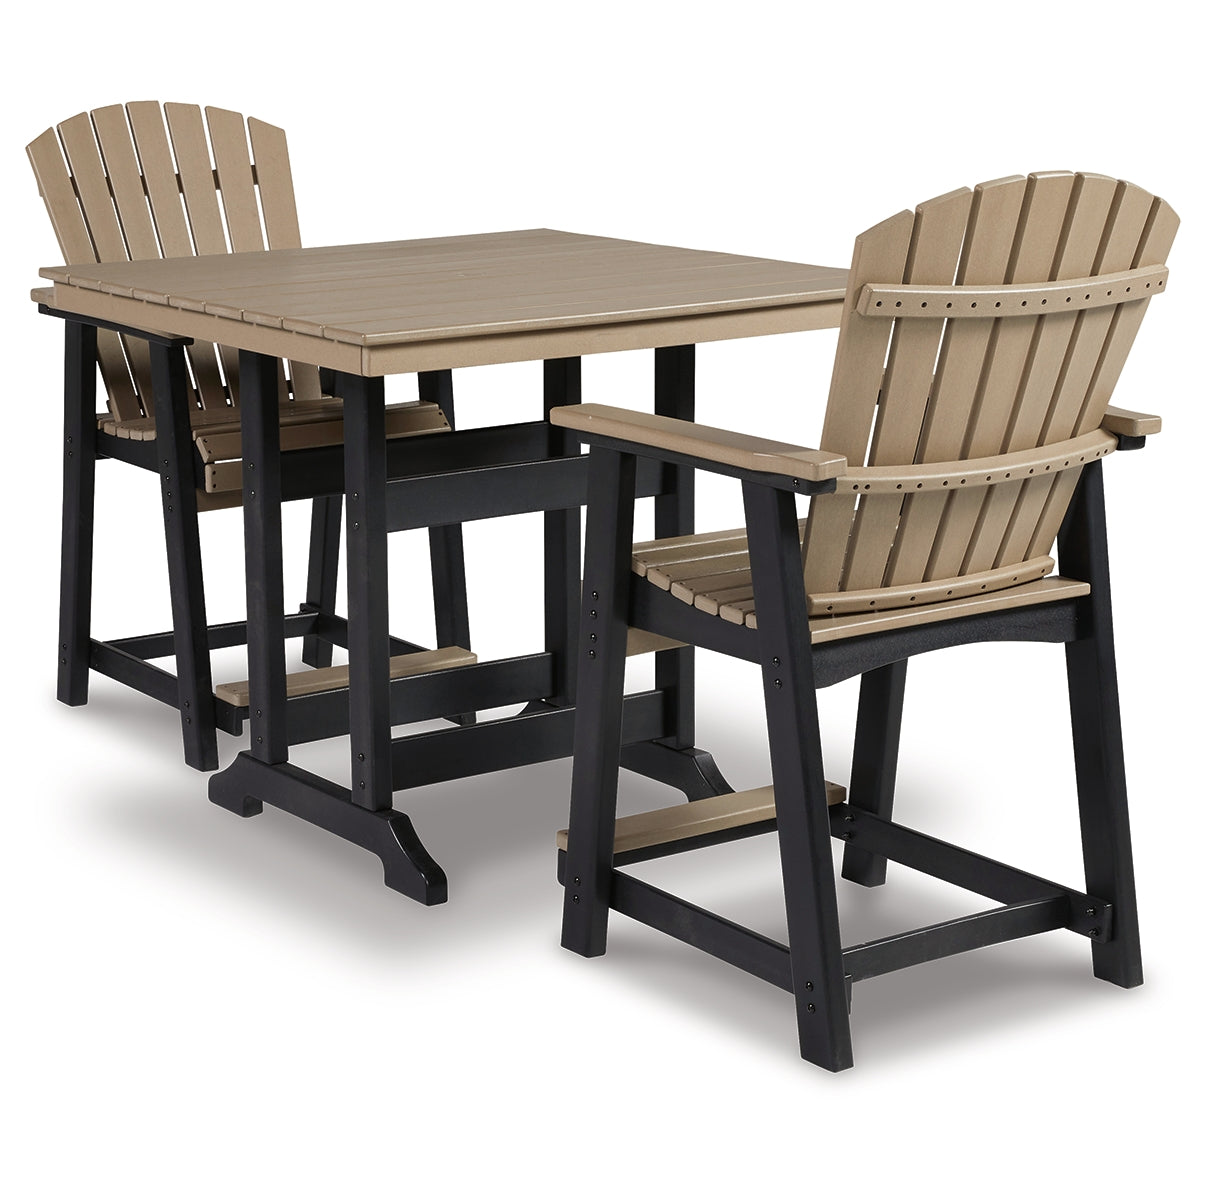 Fairen Trail Outdoor Counter Height Dining Table and 2 Barstools